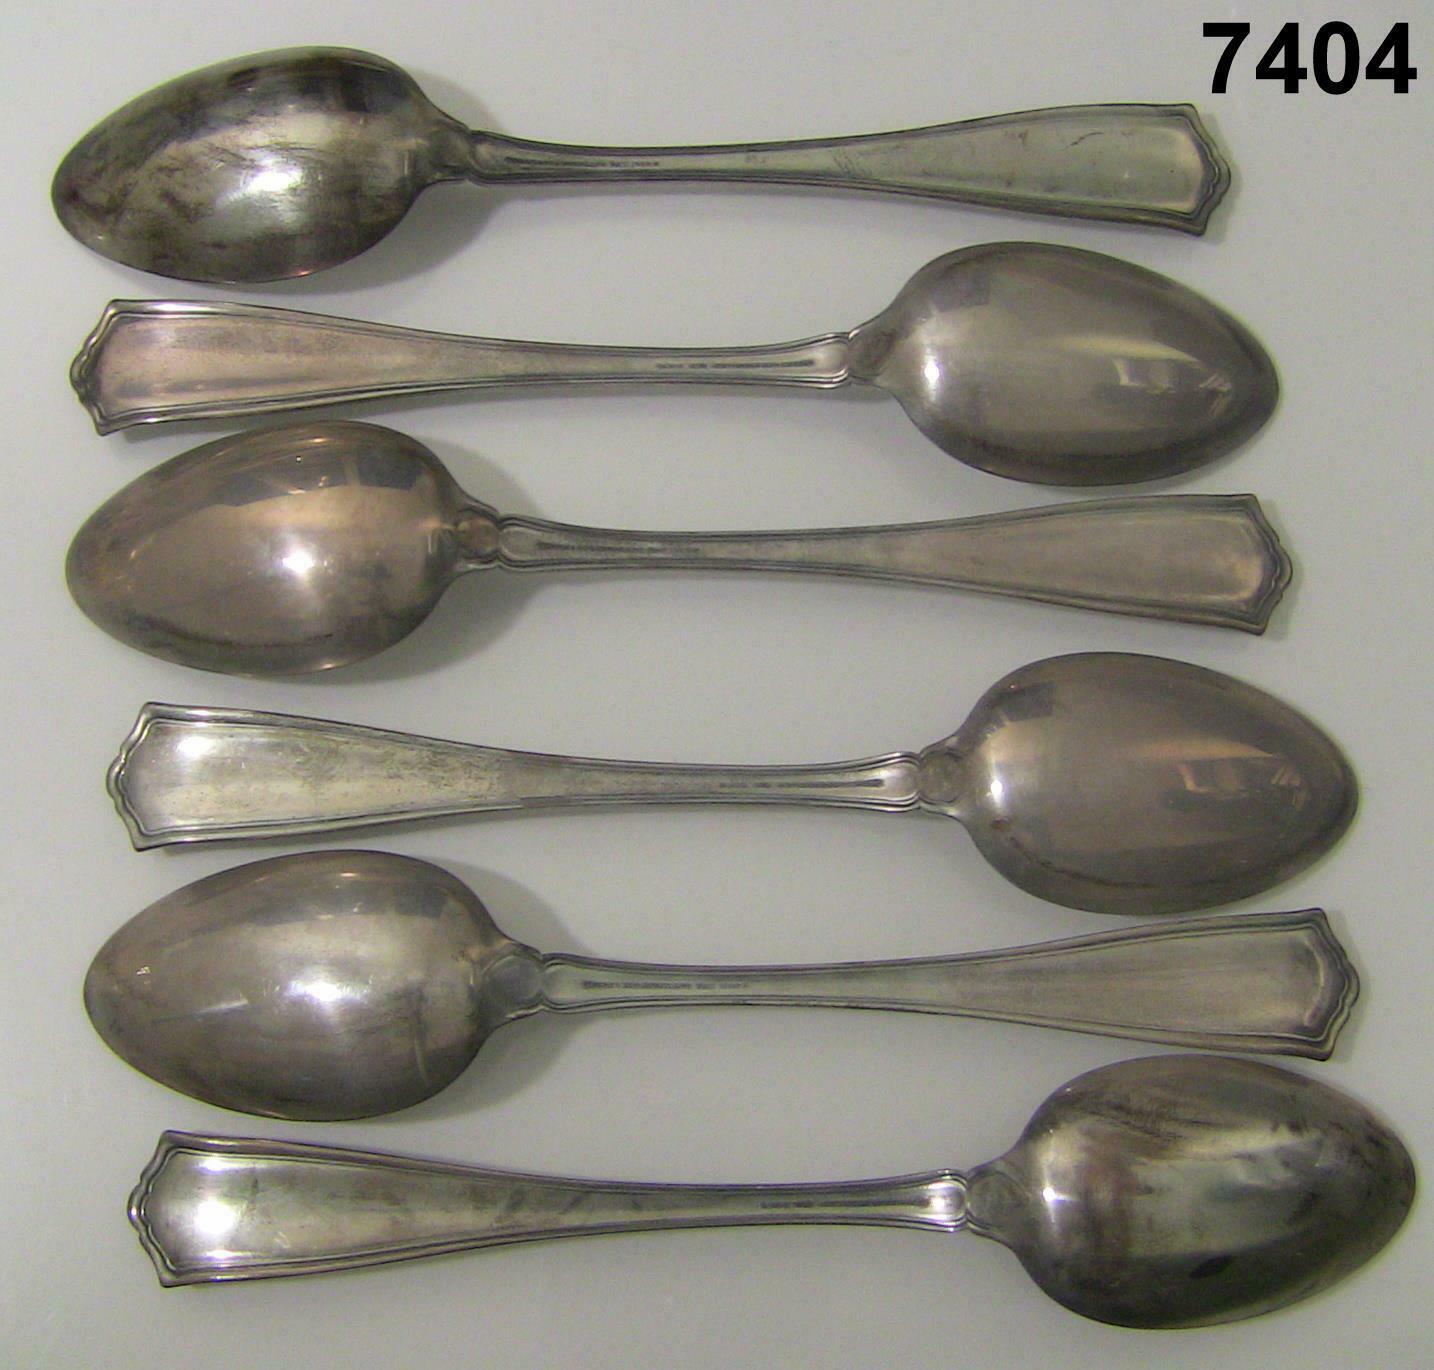 16.50 TROY OZ WINTROP BY TIFFANY CO STERLING SILVER SPOONS (6) MONOGRAM H #7404